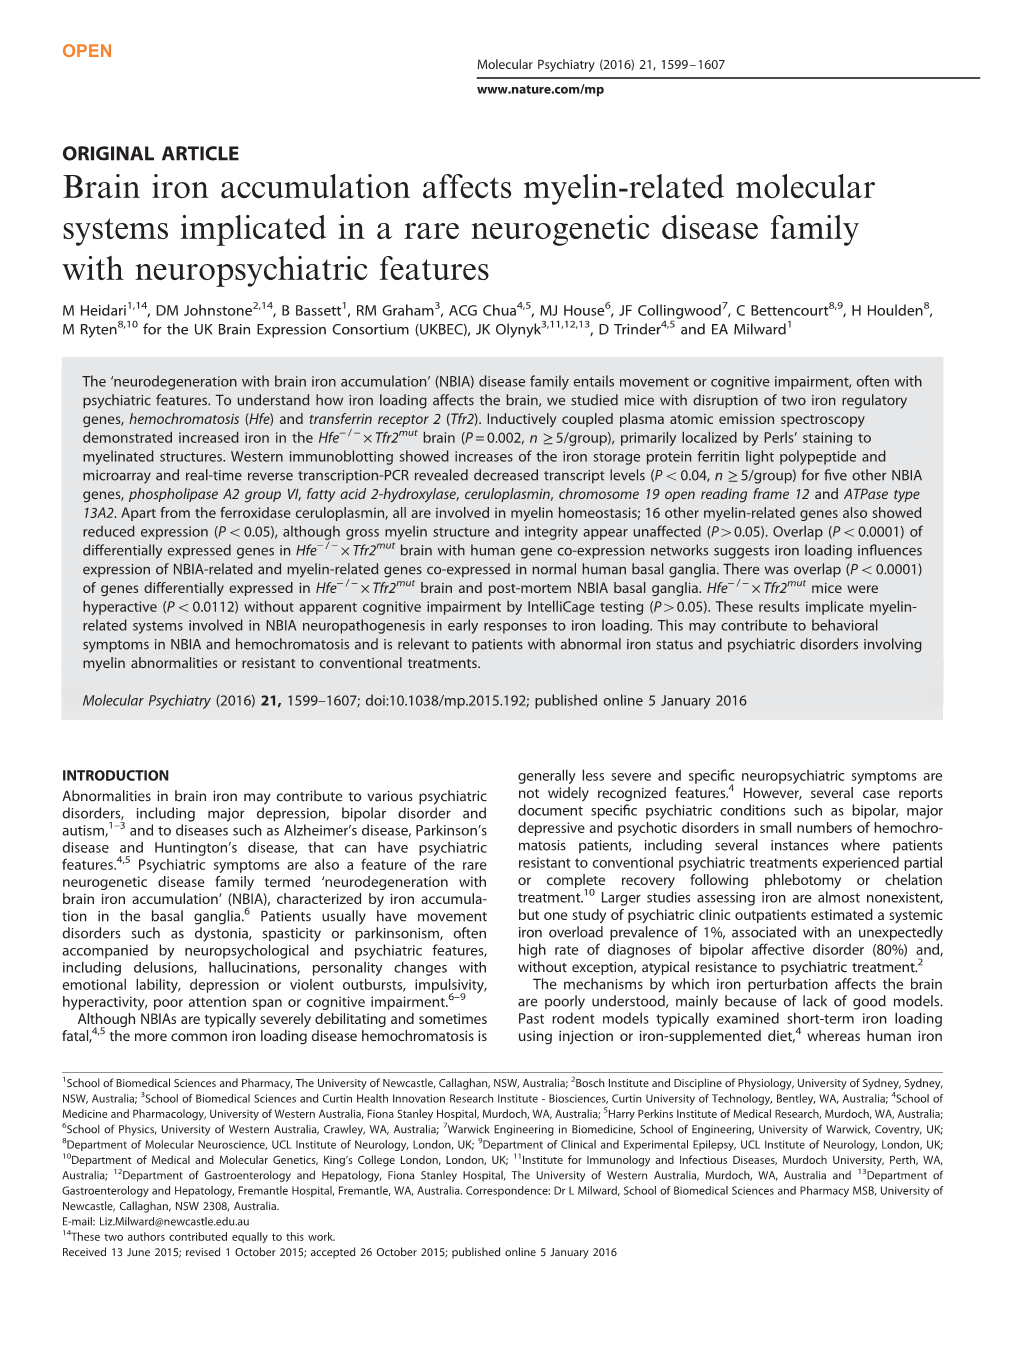 Brain Iron Accumulation Affects Myelin-Related Molecular Systems Implicated in a Rare Neurogenetic Disease Family with Neuropsychiatric Features